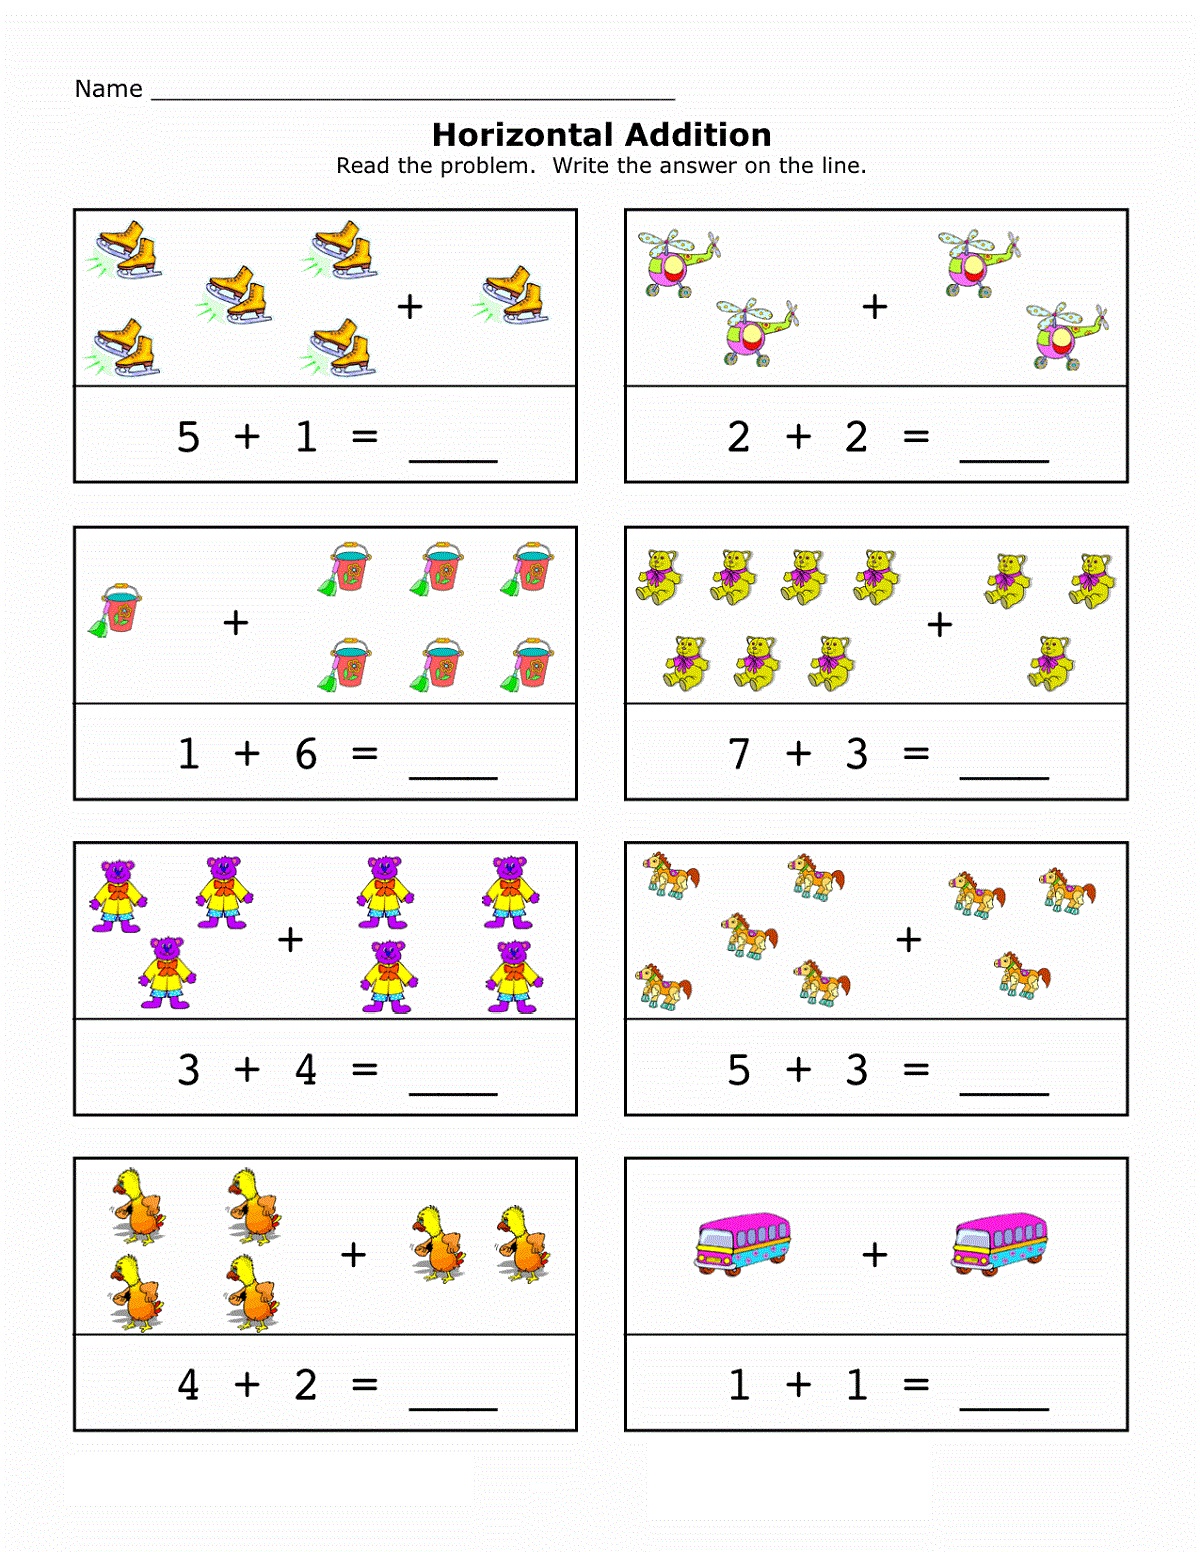 addition-worksheets-with-pictures-up-to-10-learning-printable